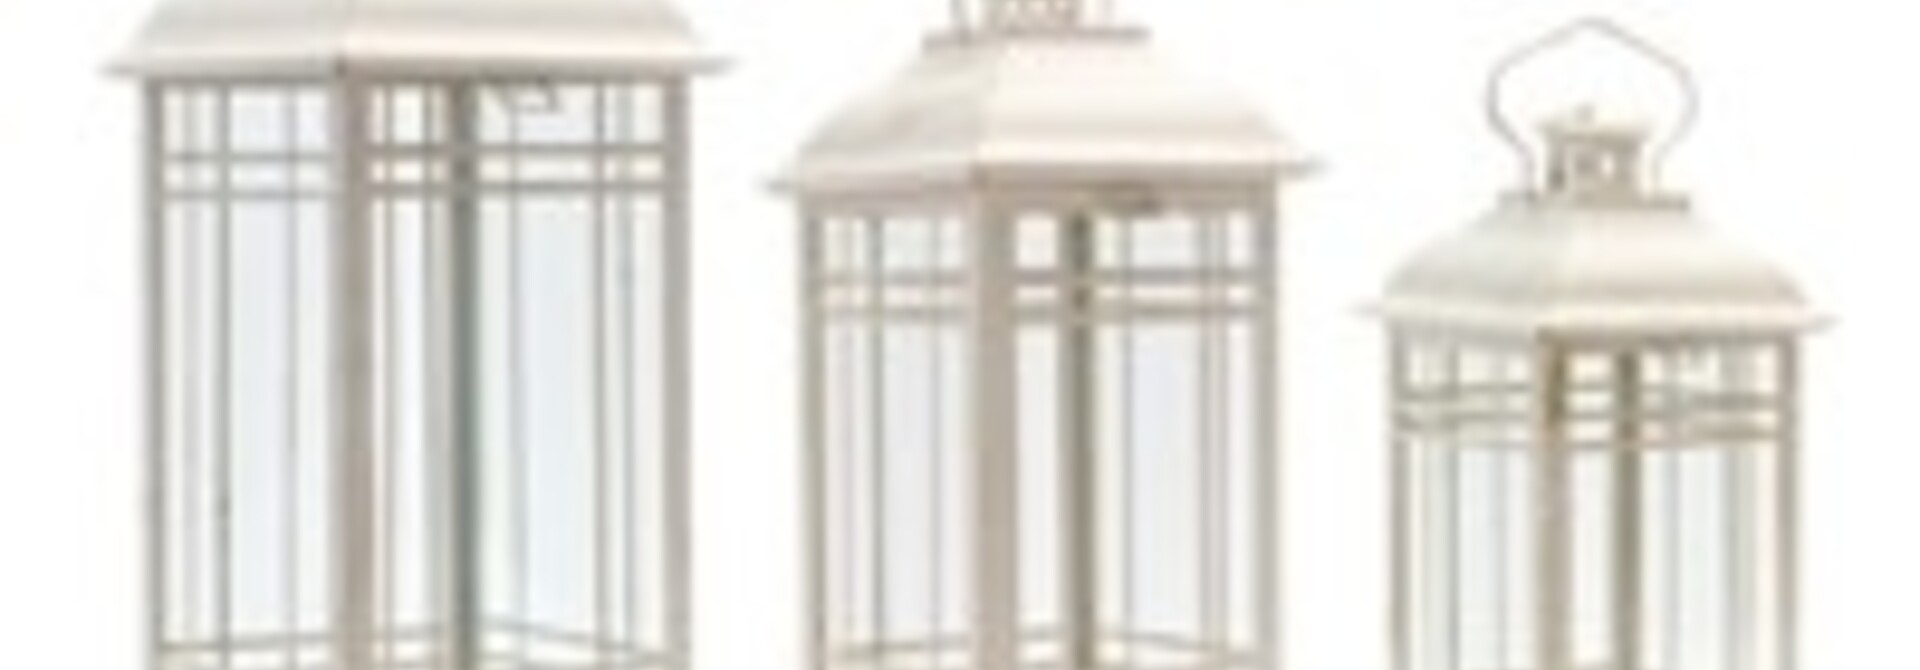 Rustic Metal |The Lantern Collection, Set of Three, White - 13.25 Inch H, 16.25 Inch H, 19.25 Inch H single